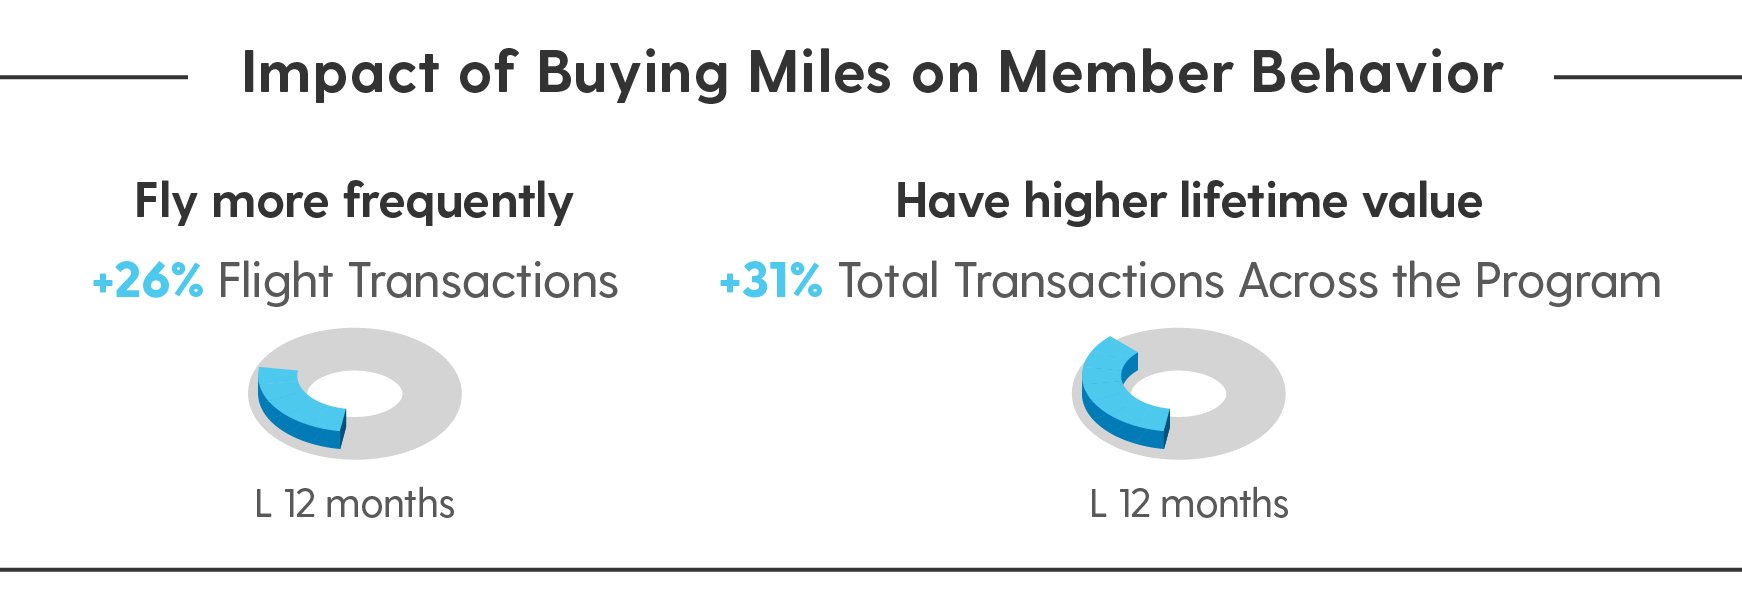 Impact of Buying Miles on Member Behavior:  Fly more frequently +26% Flight Transactions and  Have higher lifetime value +31% Total Transactions Across the Program